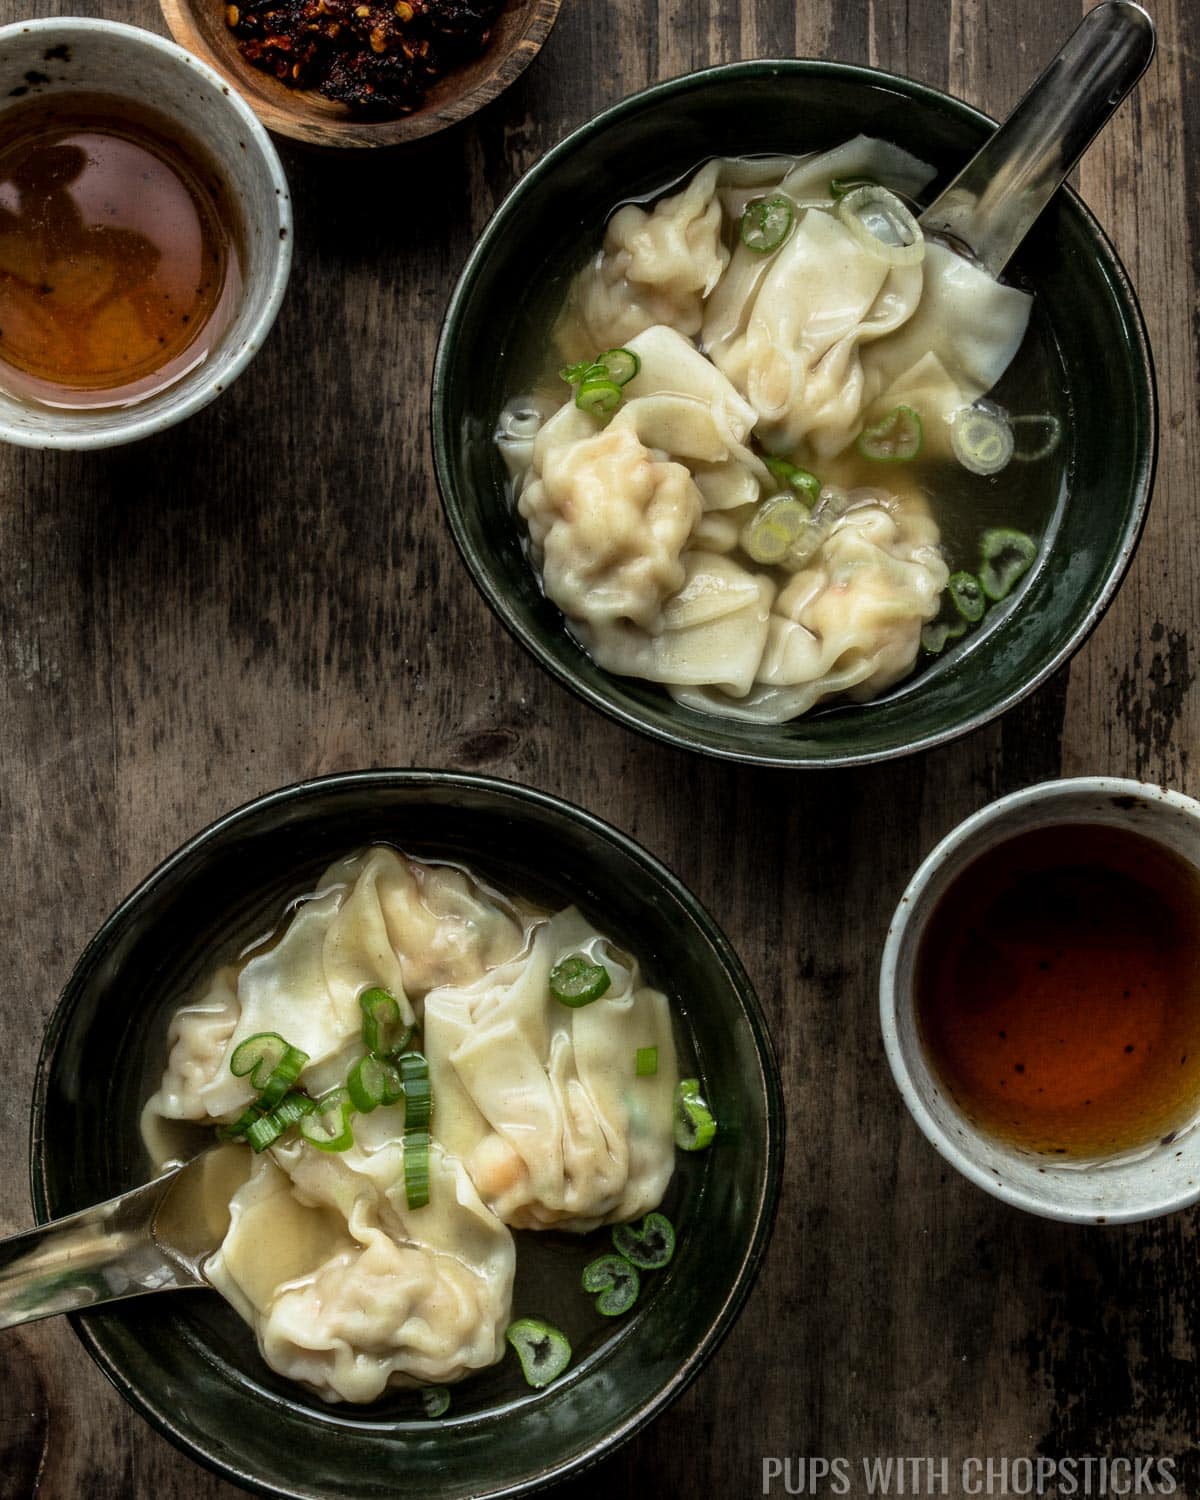 2 small bowls with wonton dumplings in broth served with tea